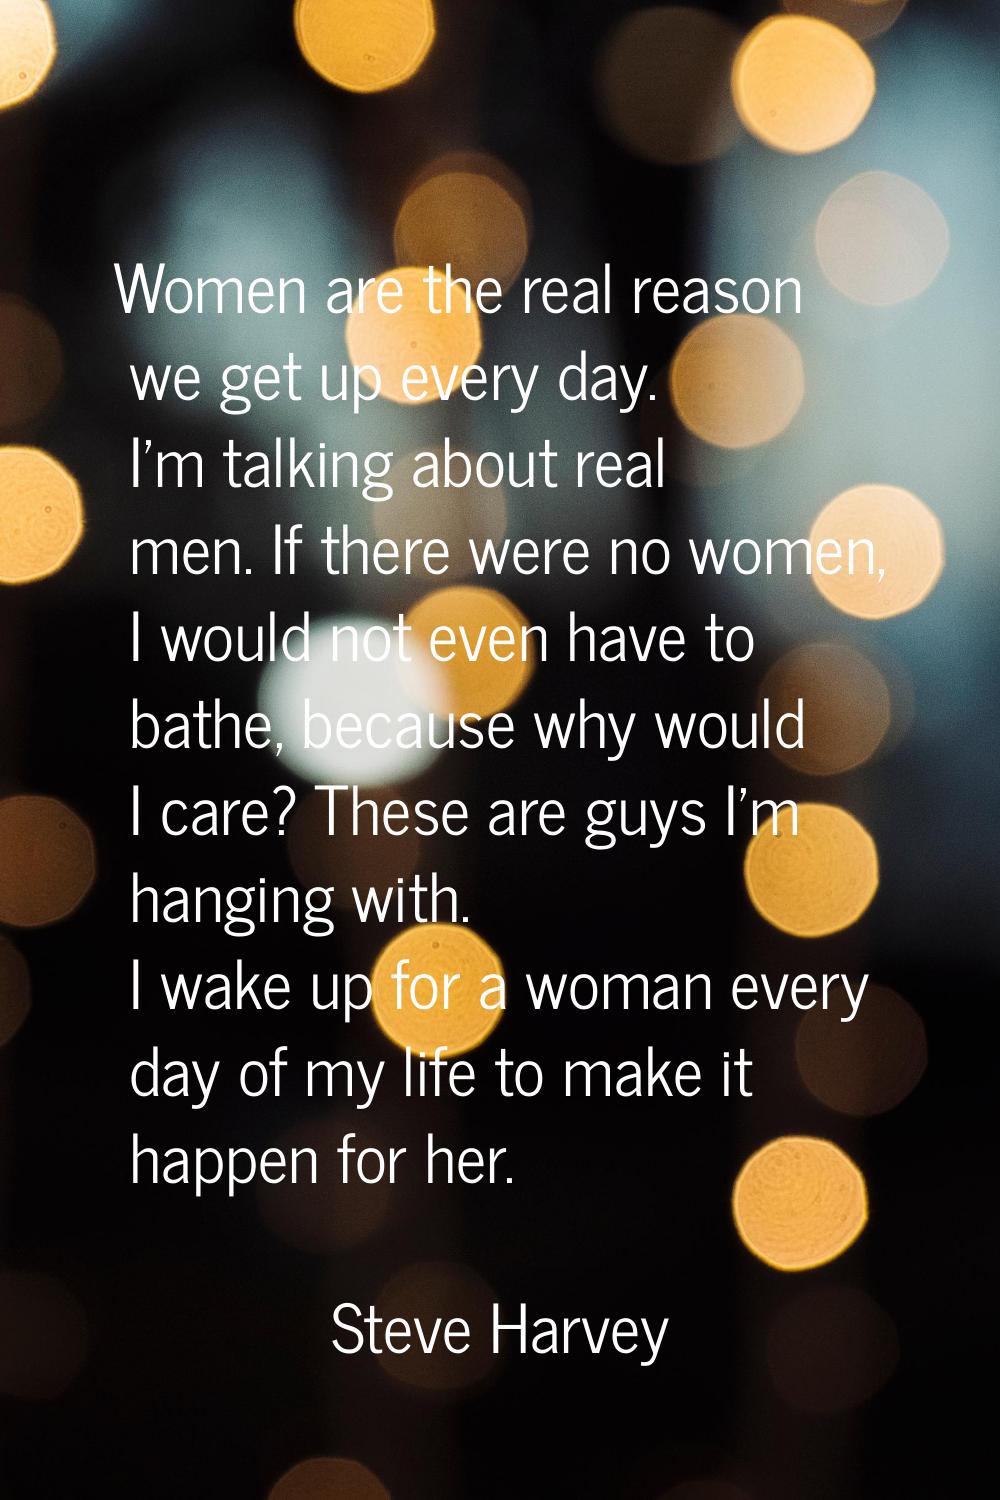 Women are the real reason we get up every day. I'm talking about real men. If there were no women, 